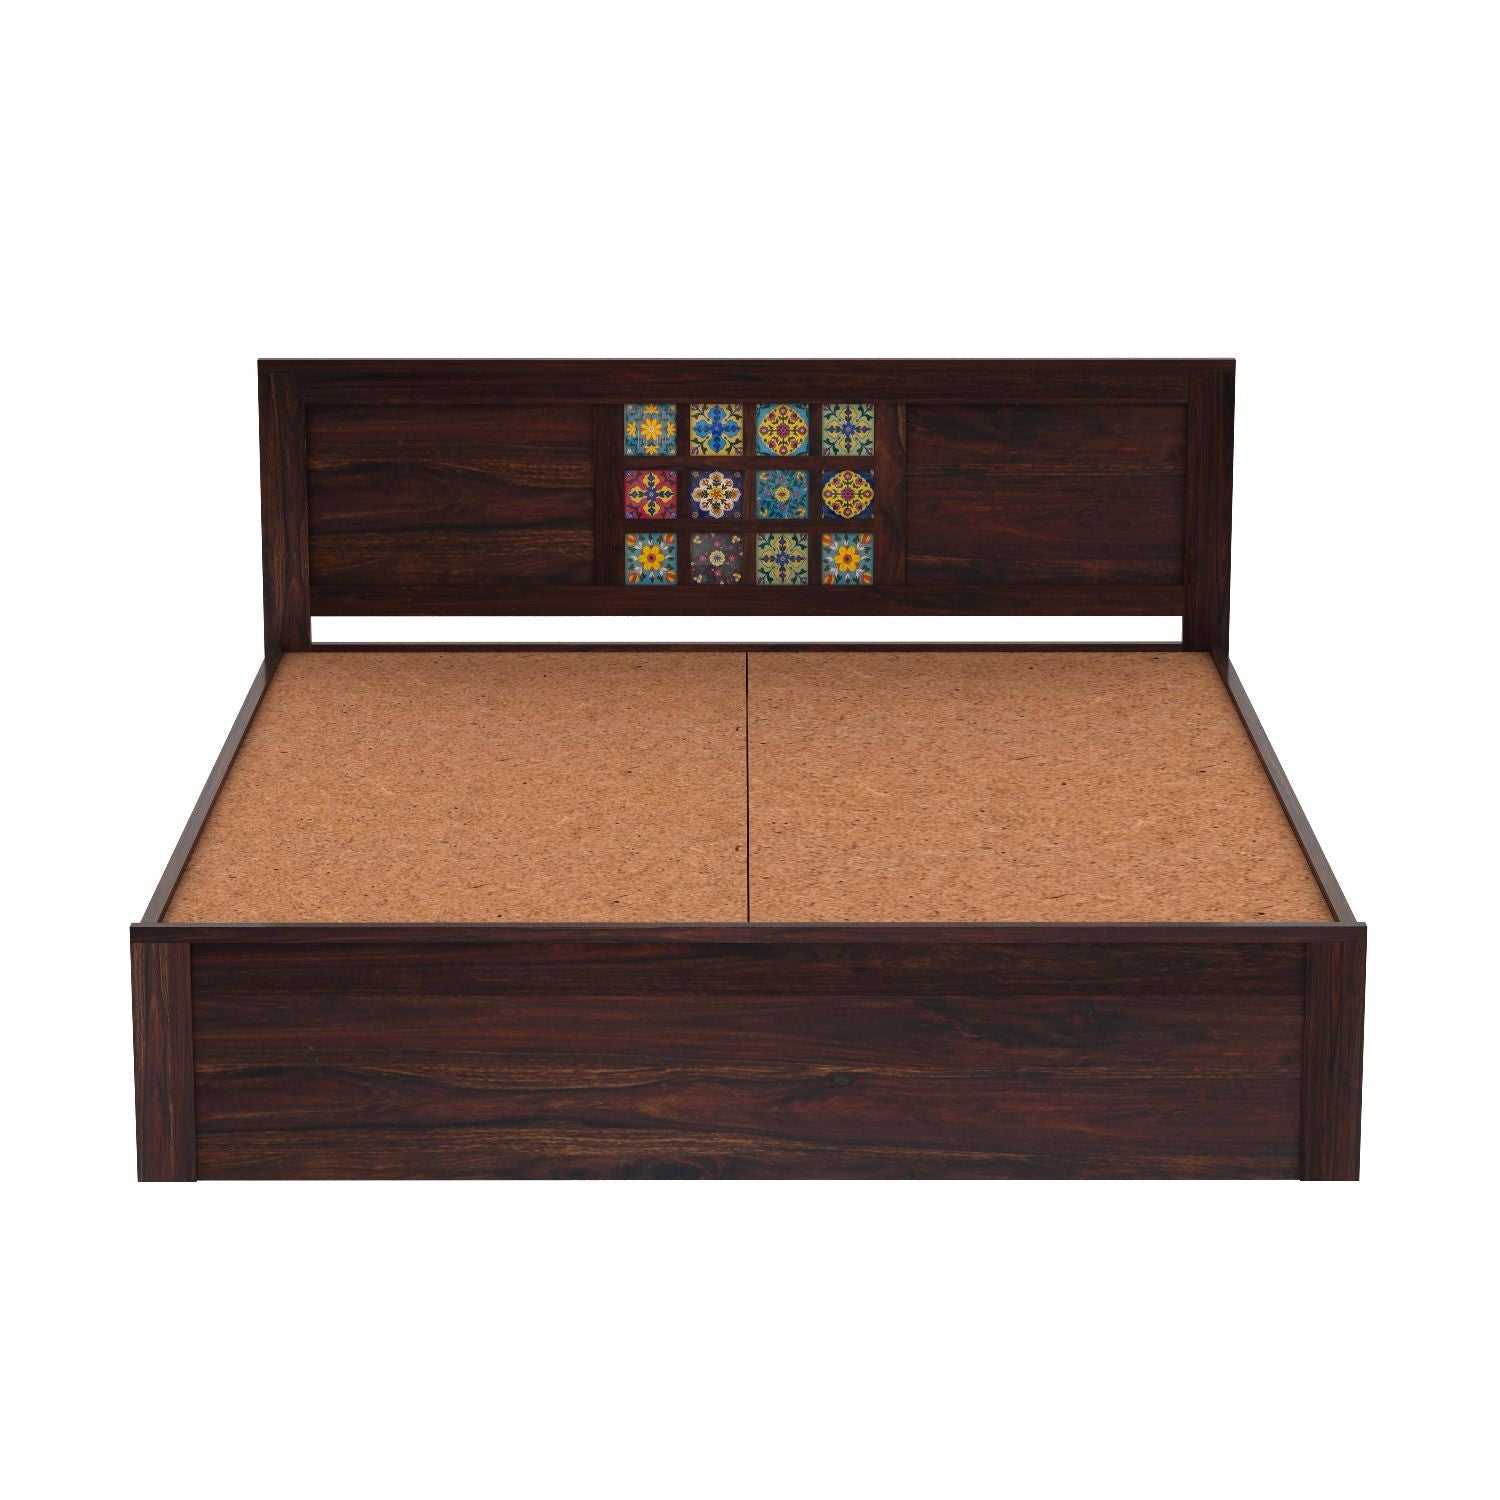 Dotwork Solid Sheesham Wood Bed With Four Drawers (Queen Size, Walnut Finish)